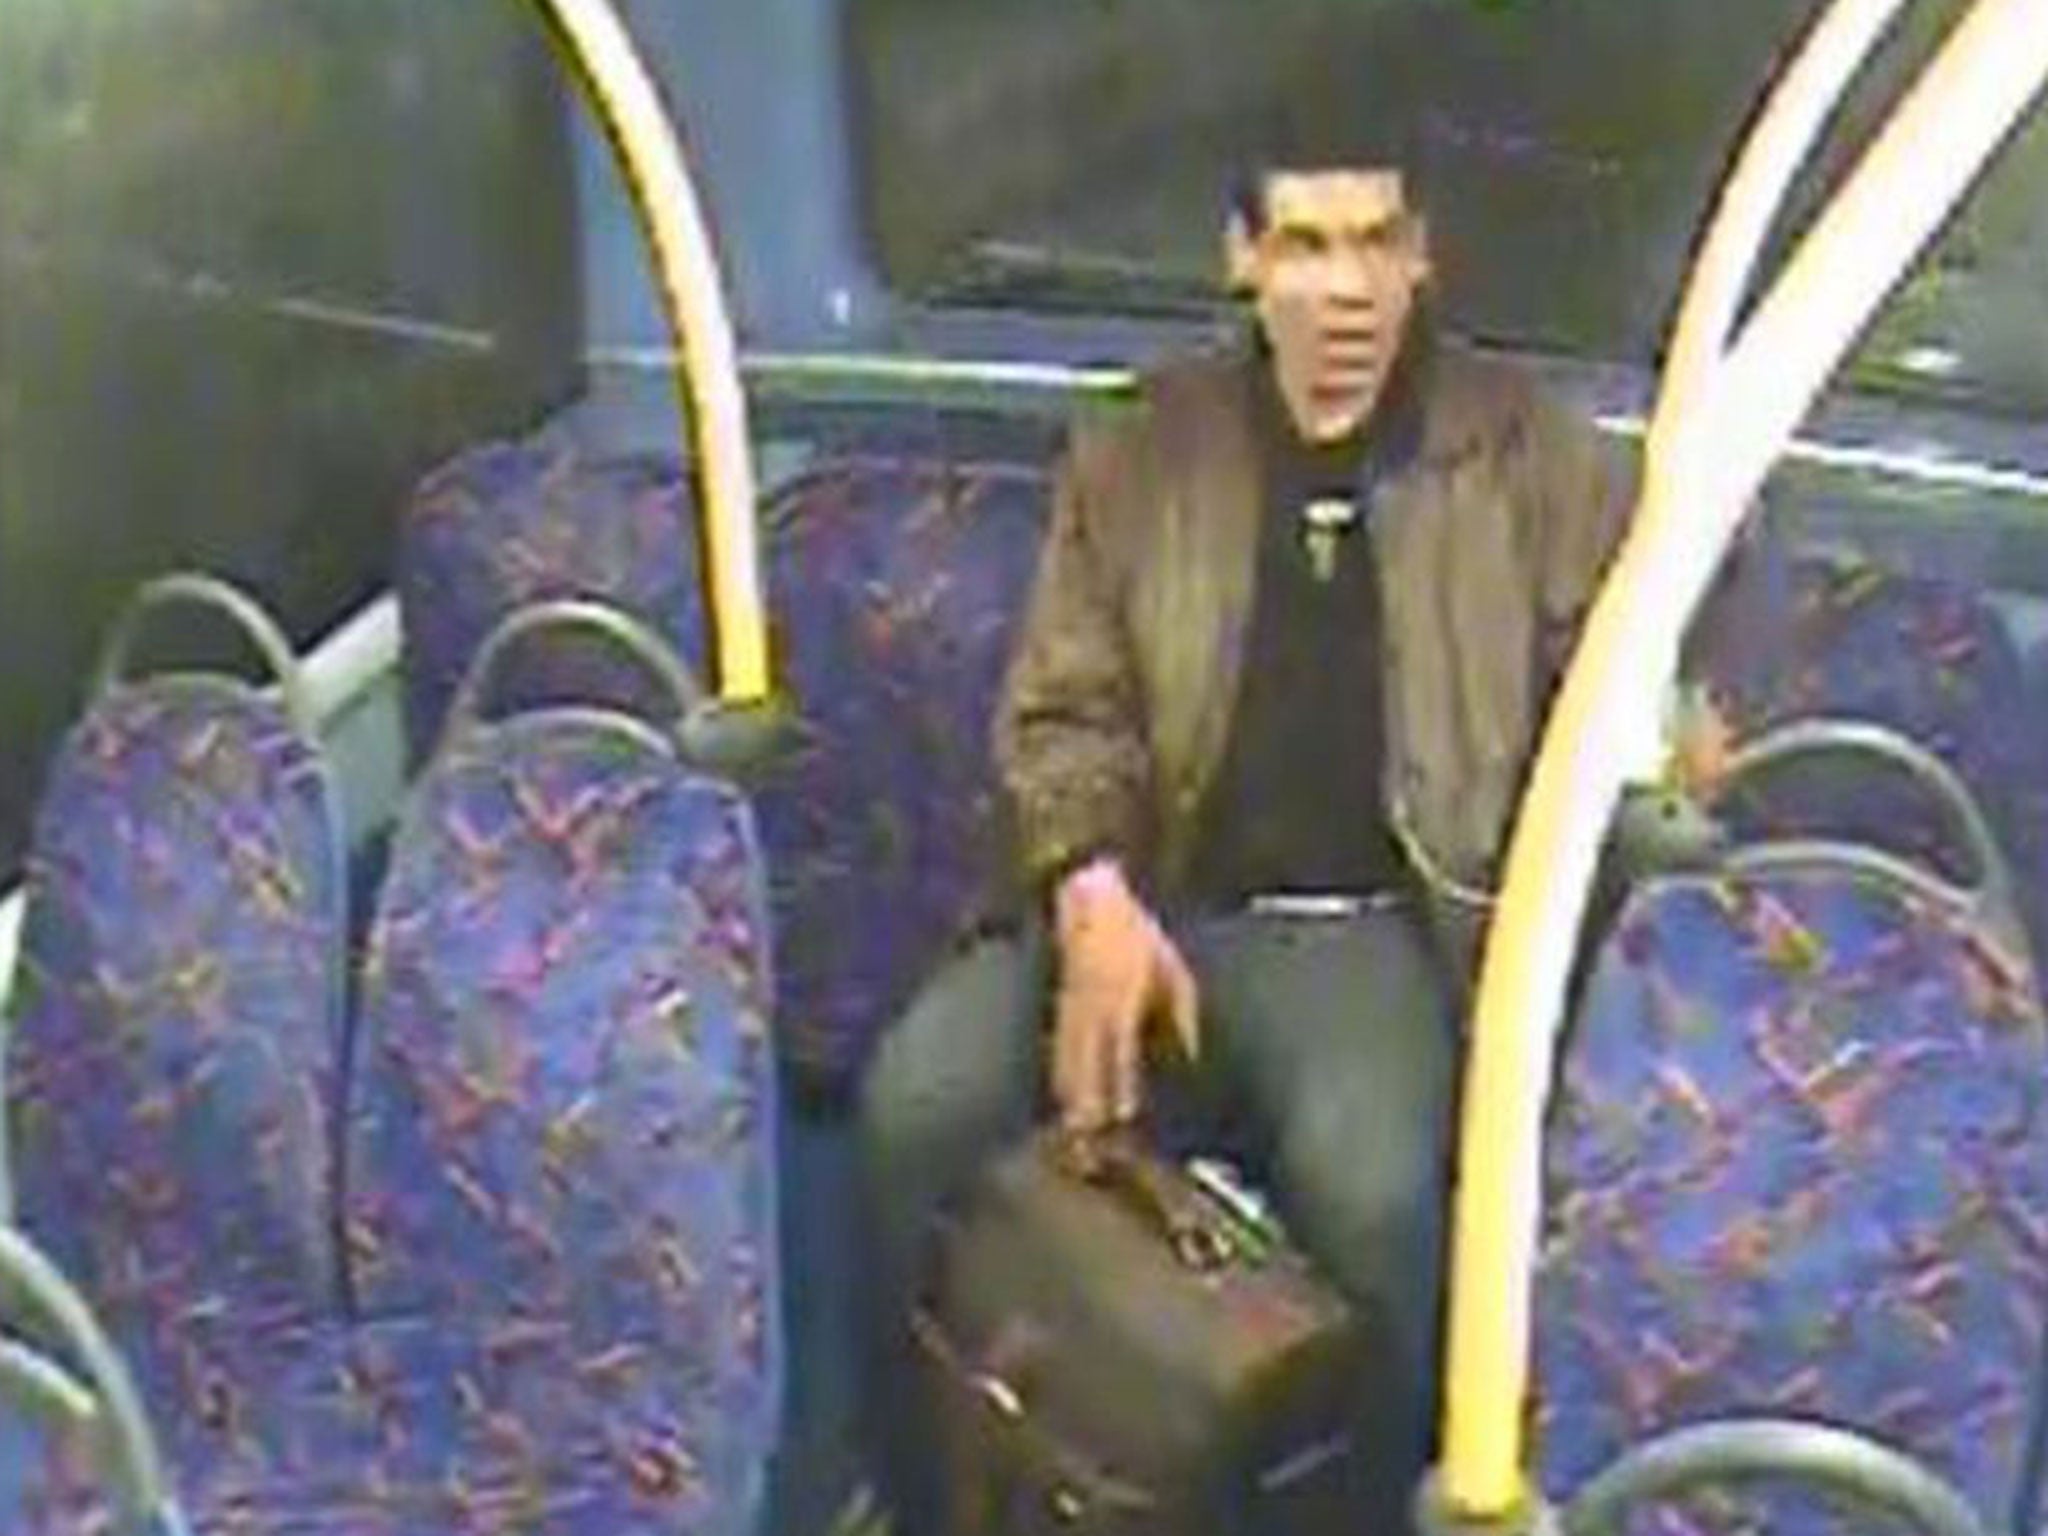 The attacker Philip Spence pictured on a night bus (PA)